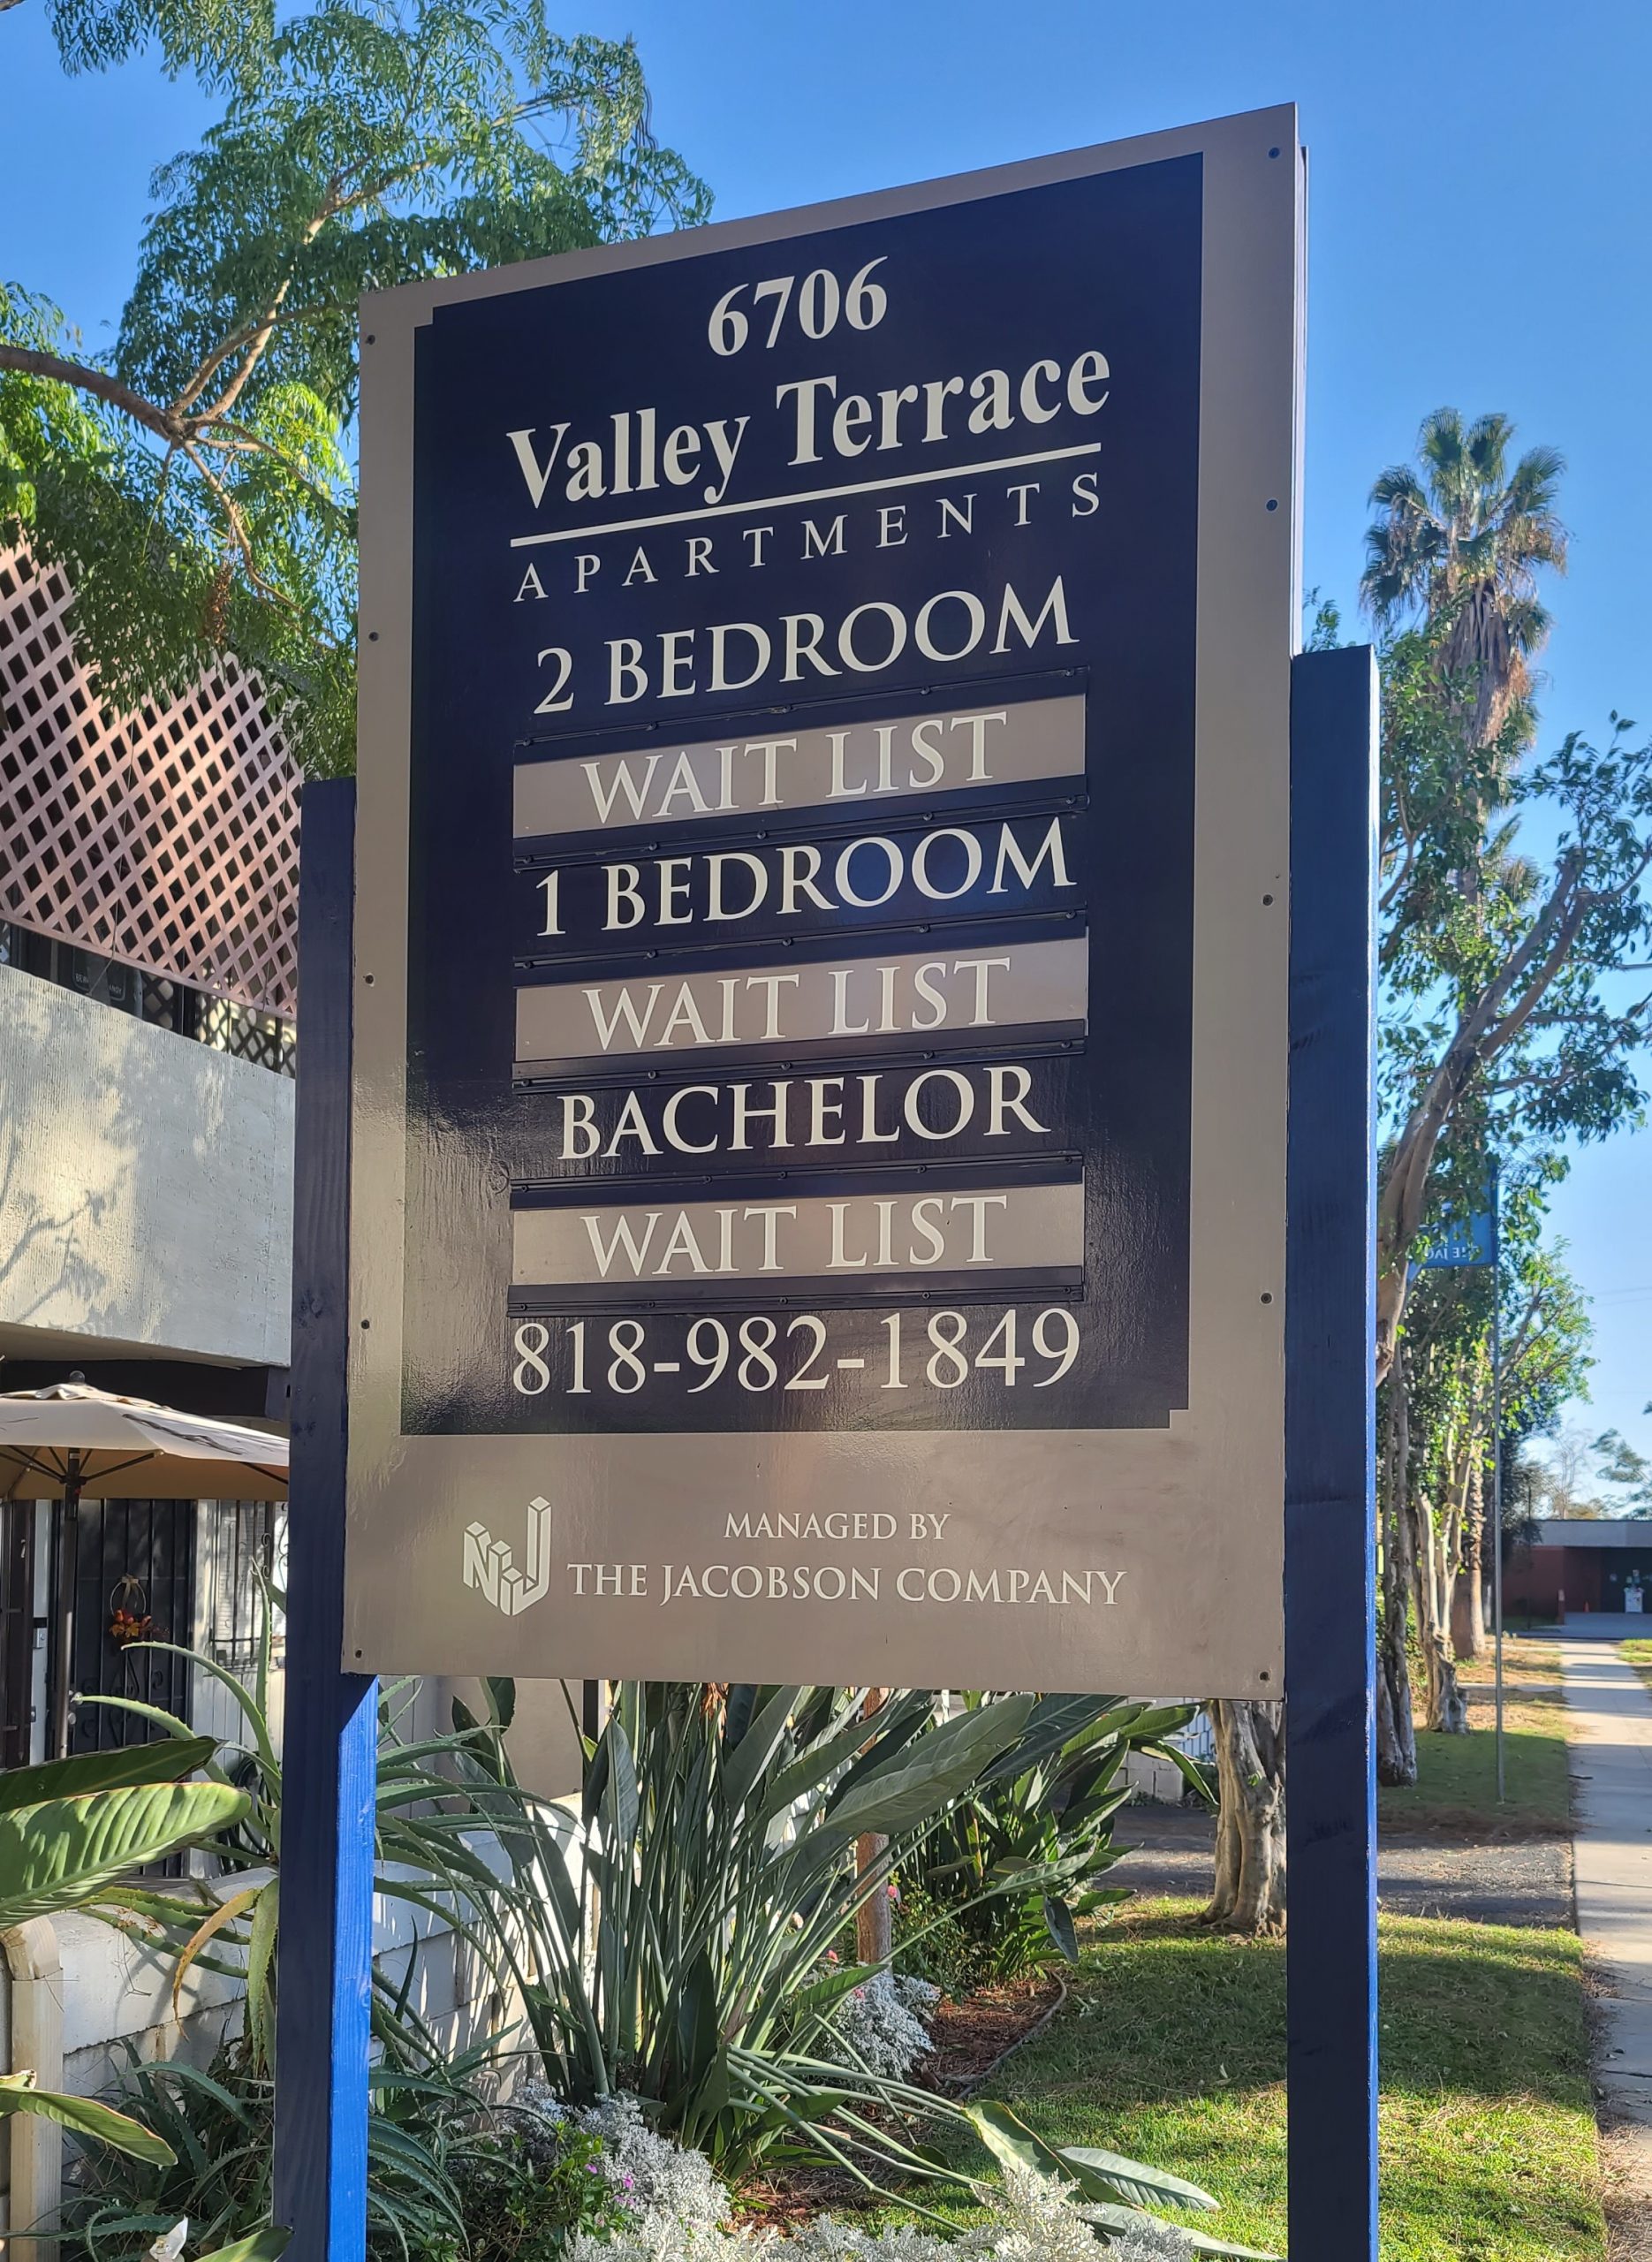 The apartment post and panel sign for The Jacobson Company's North Hollywood property. With this they can get more eyes on the real-estate they are offering.